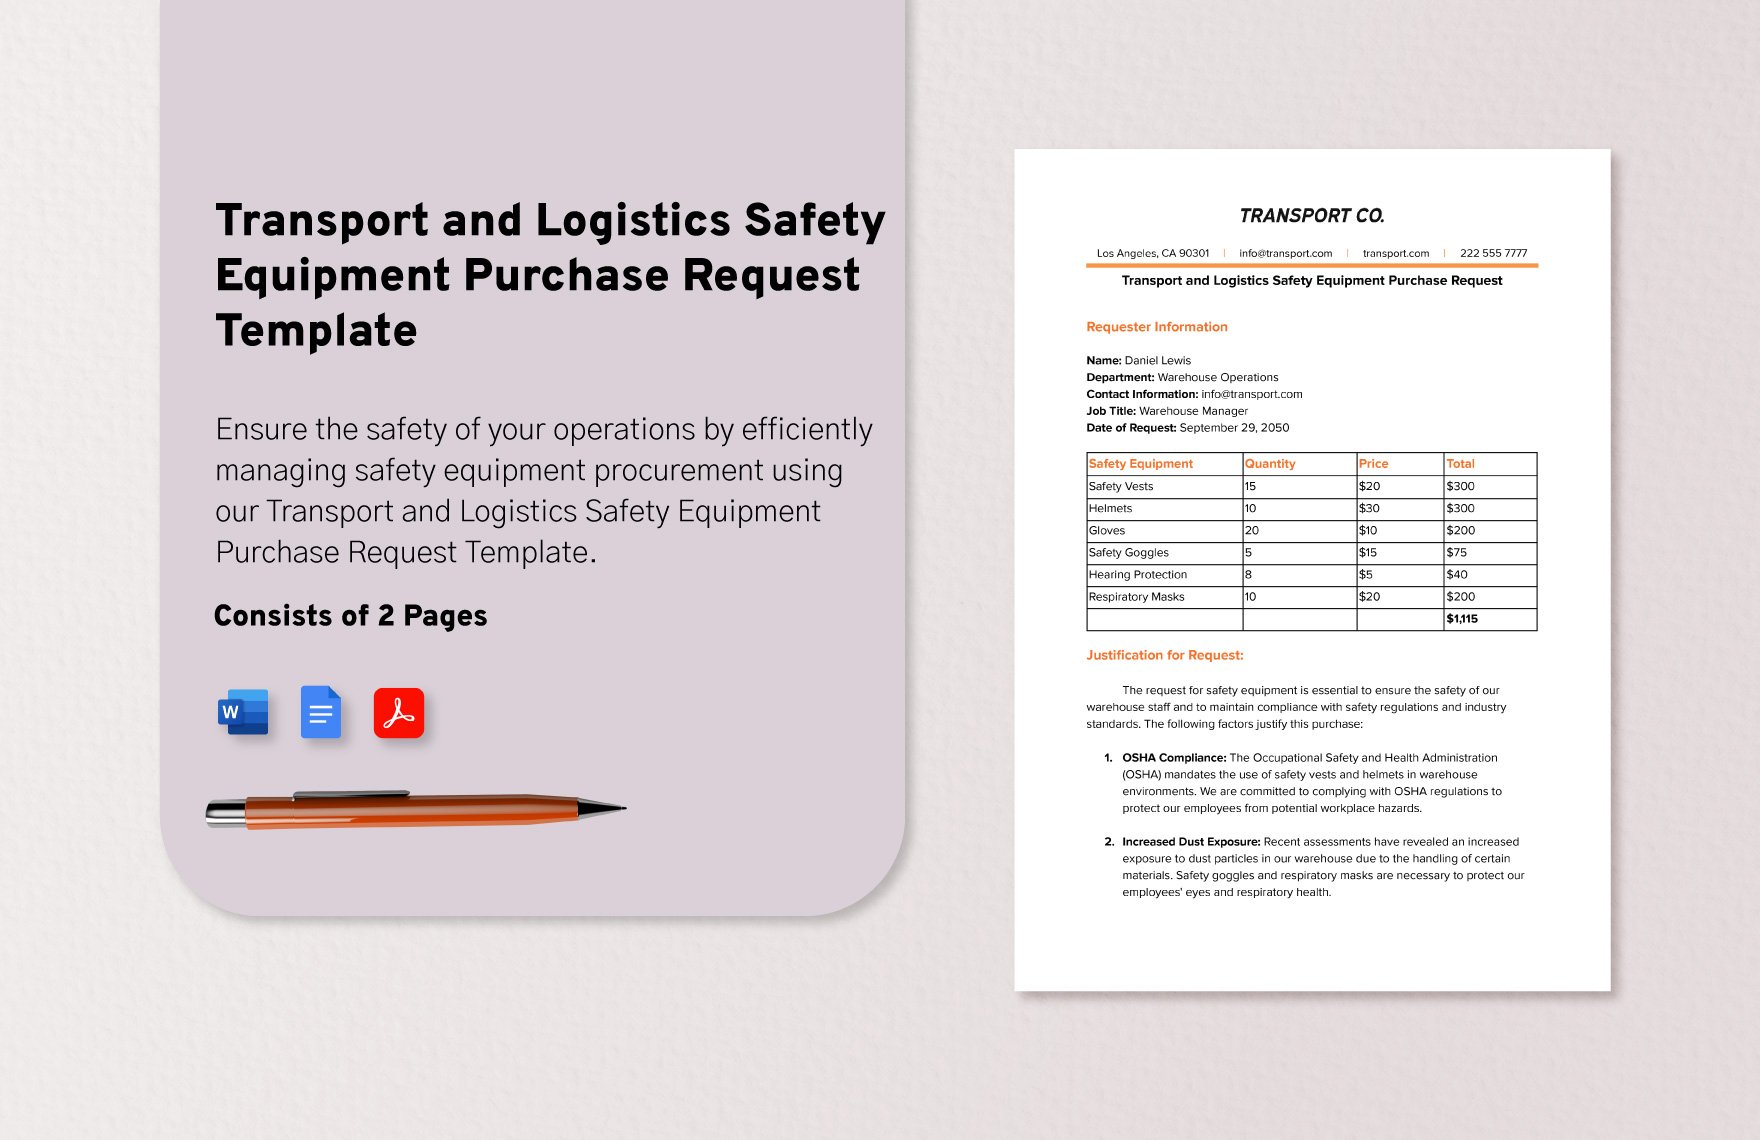 Transport and Logistics Safety Equipment Purchase Request Template